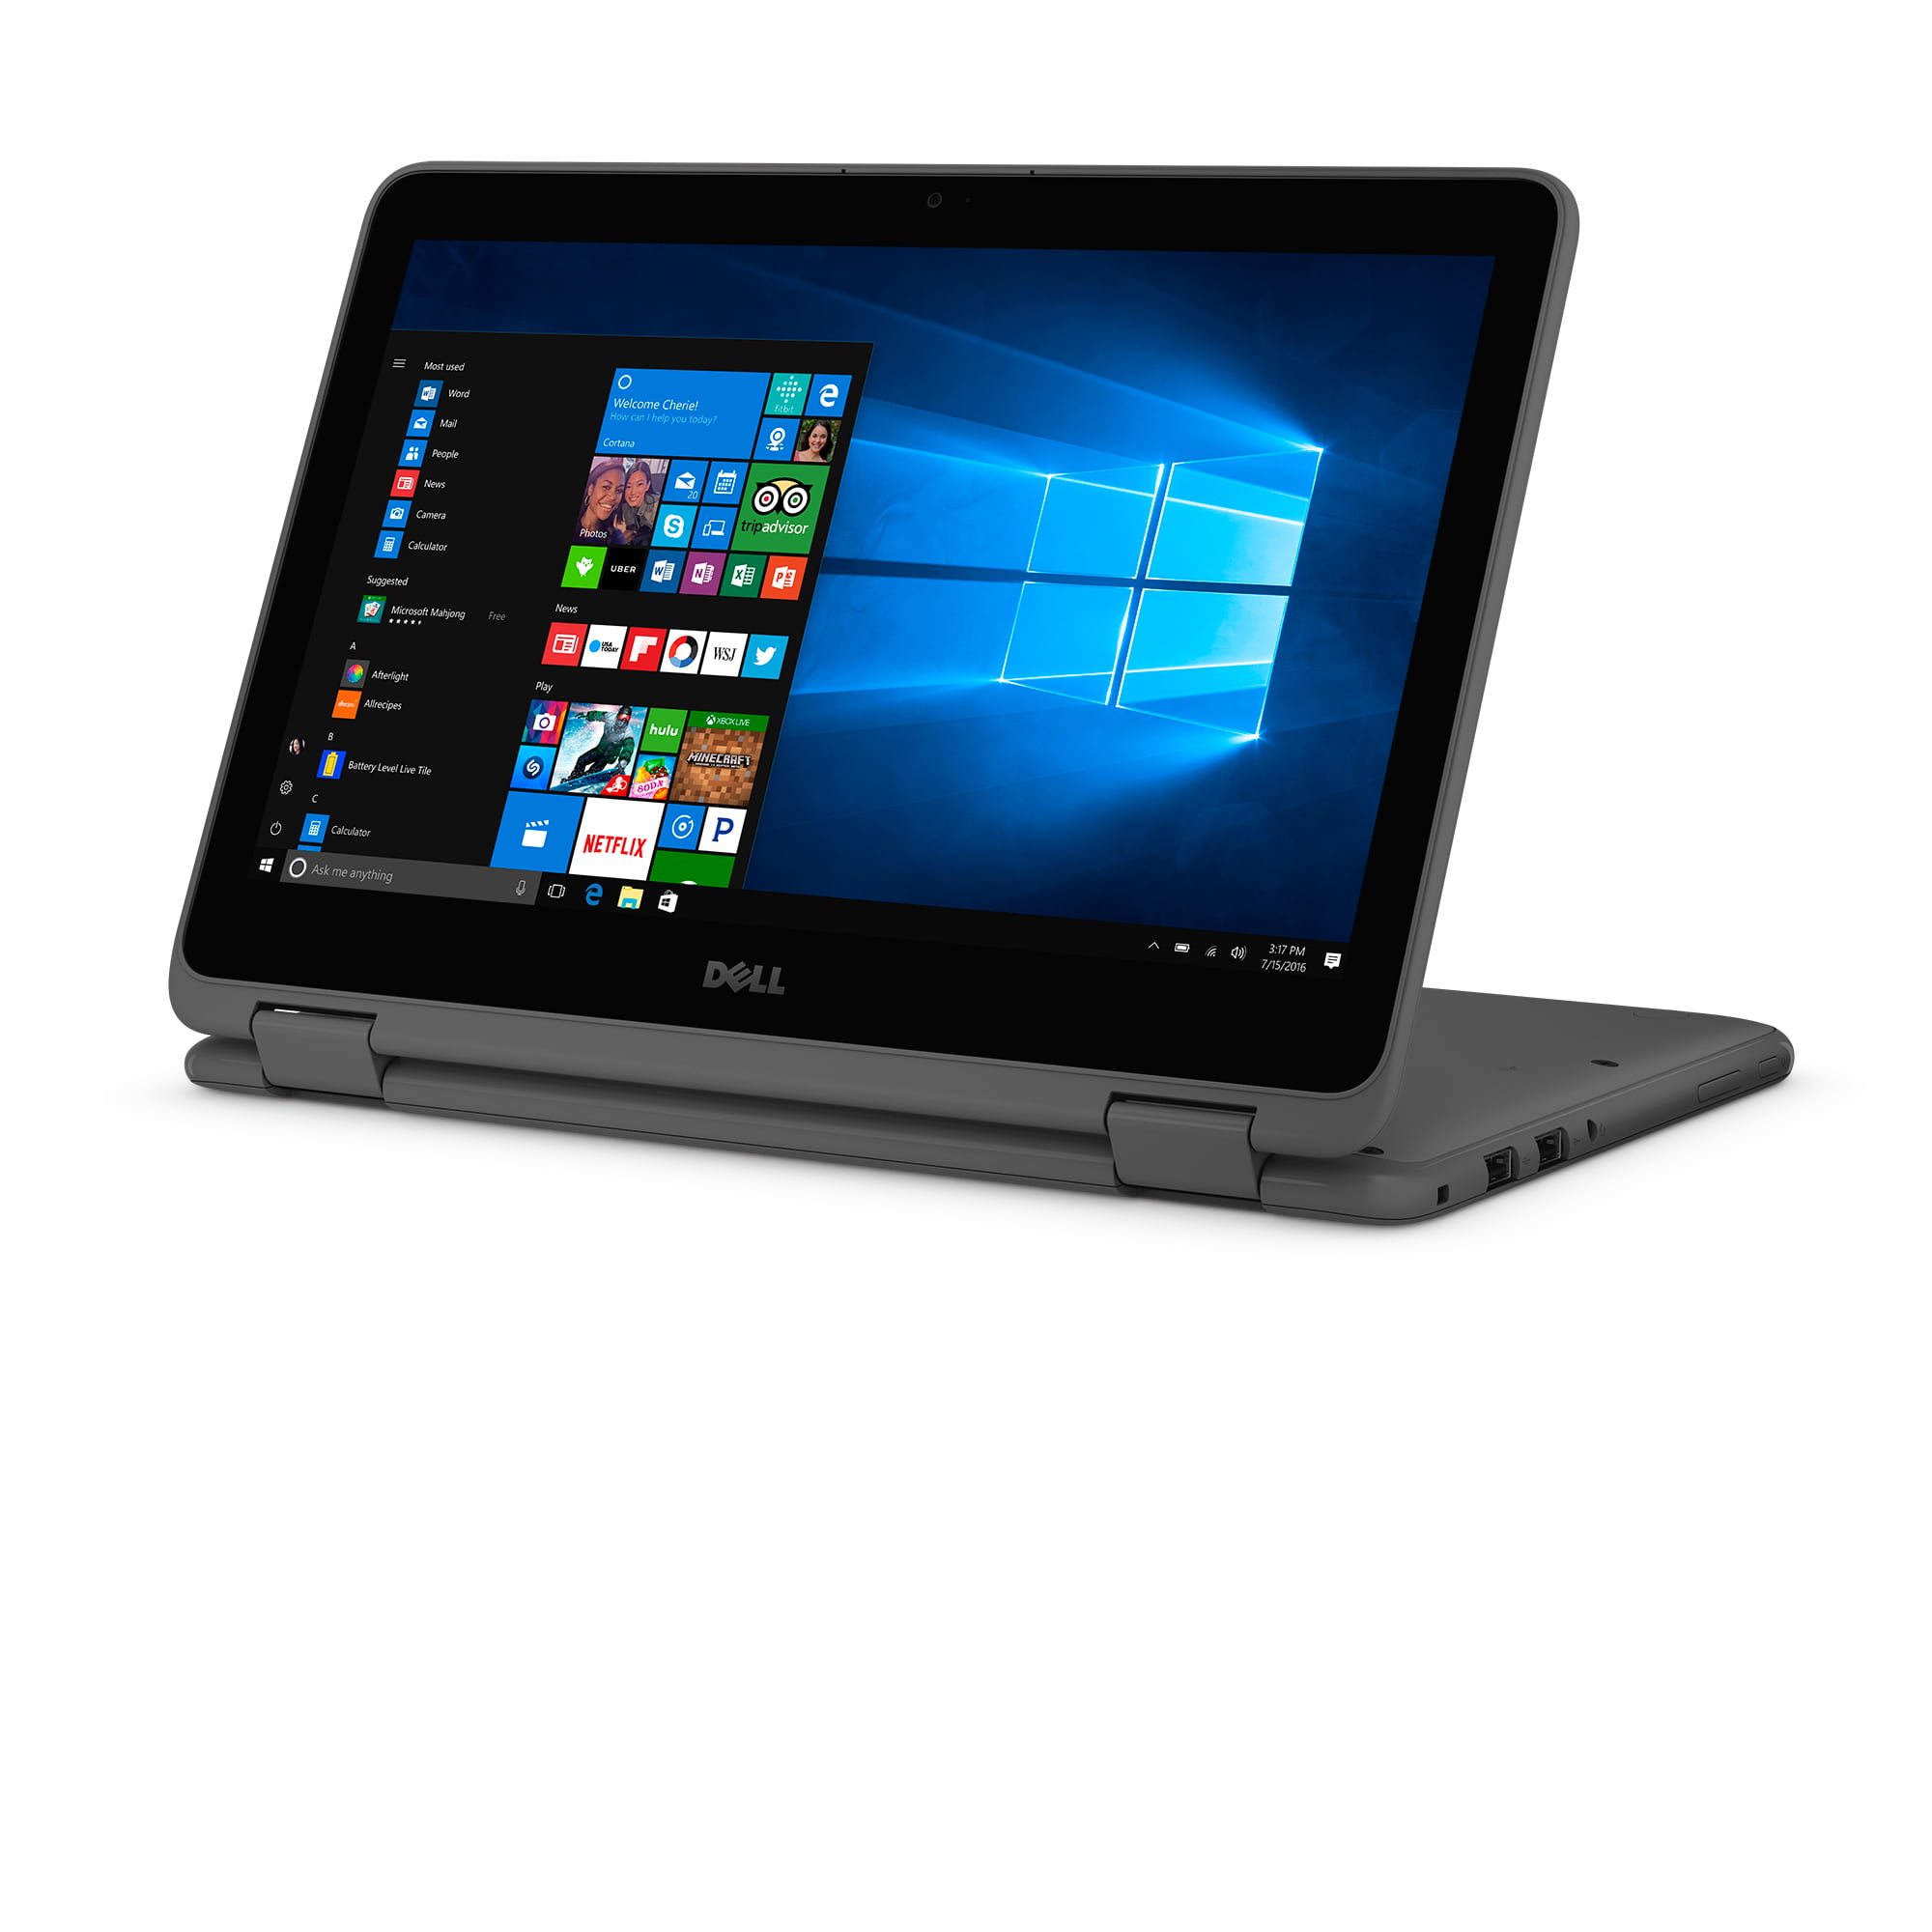 Dell Inspiron 11 3185 2-in-1 Laptop, 11.6